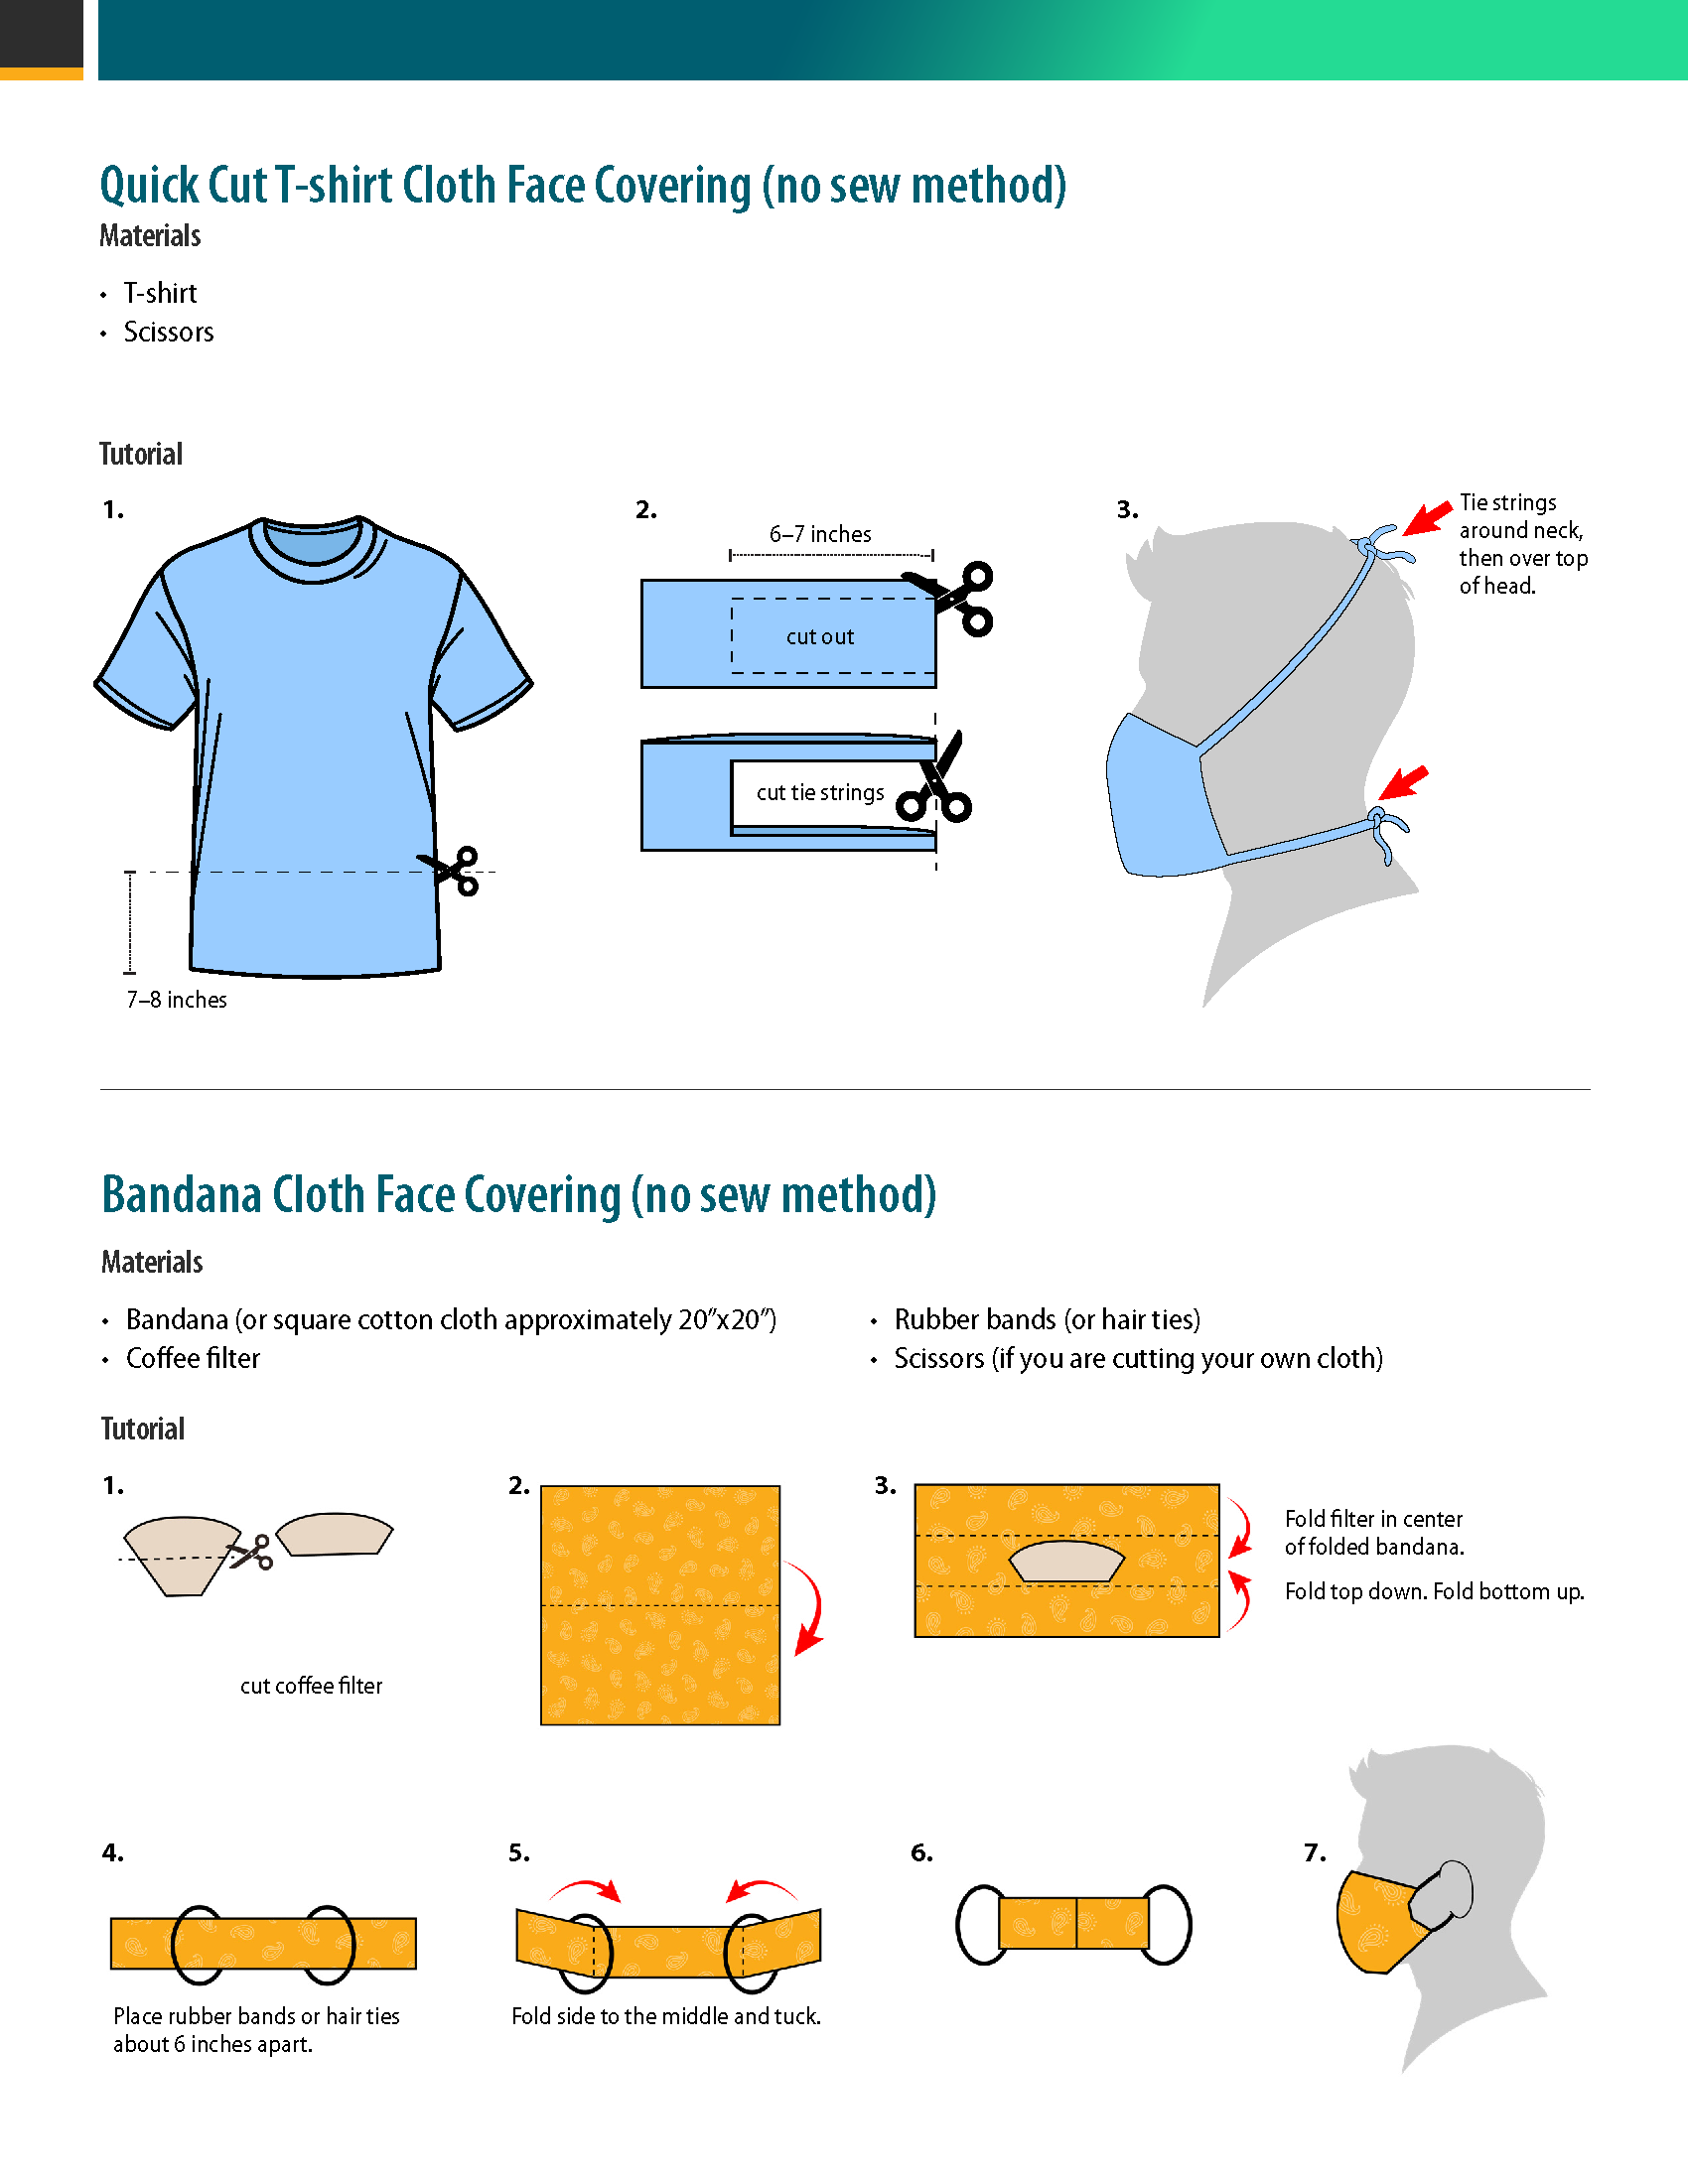 Cloth Face Covering Instructions and Guidance From CDC